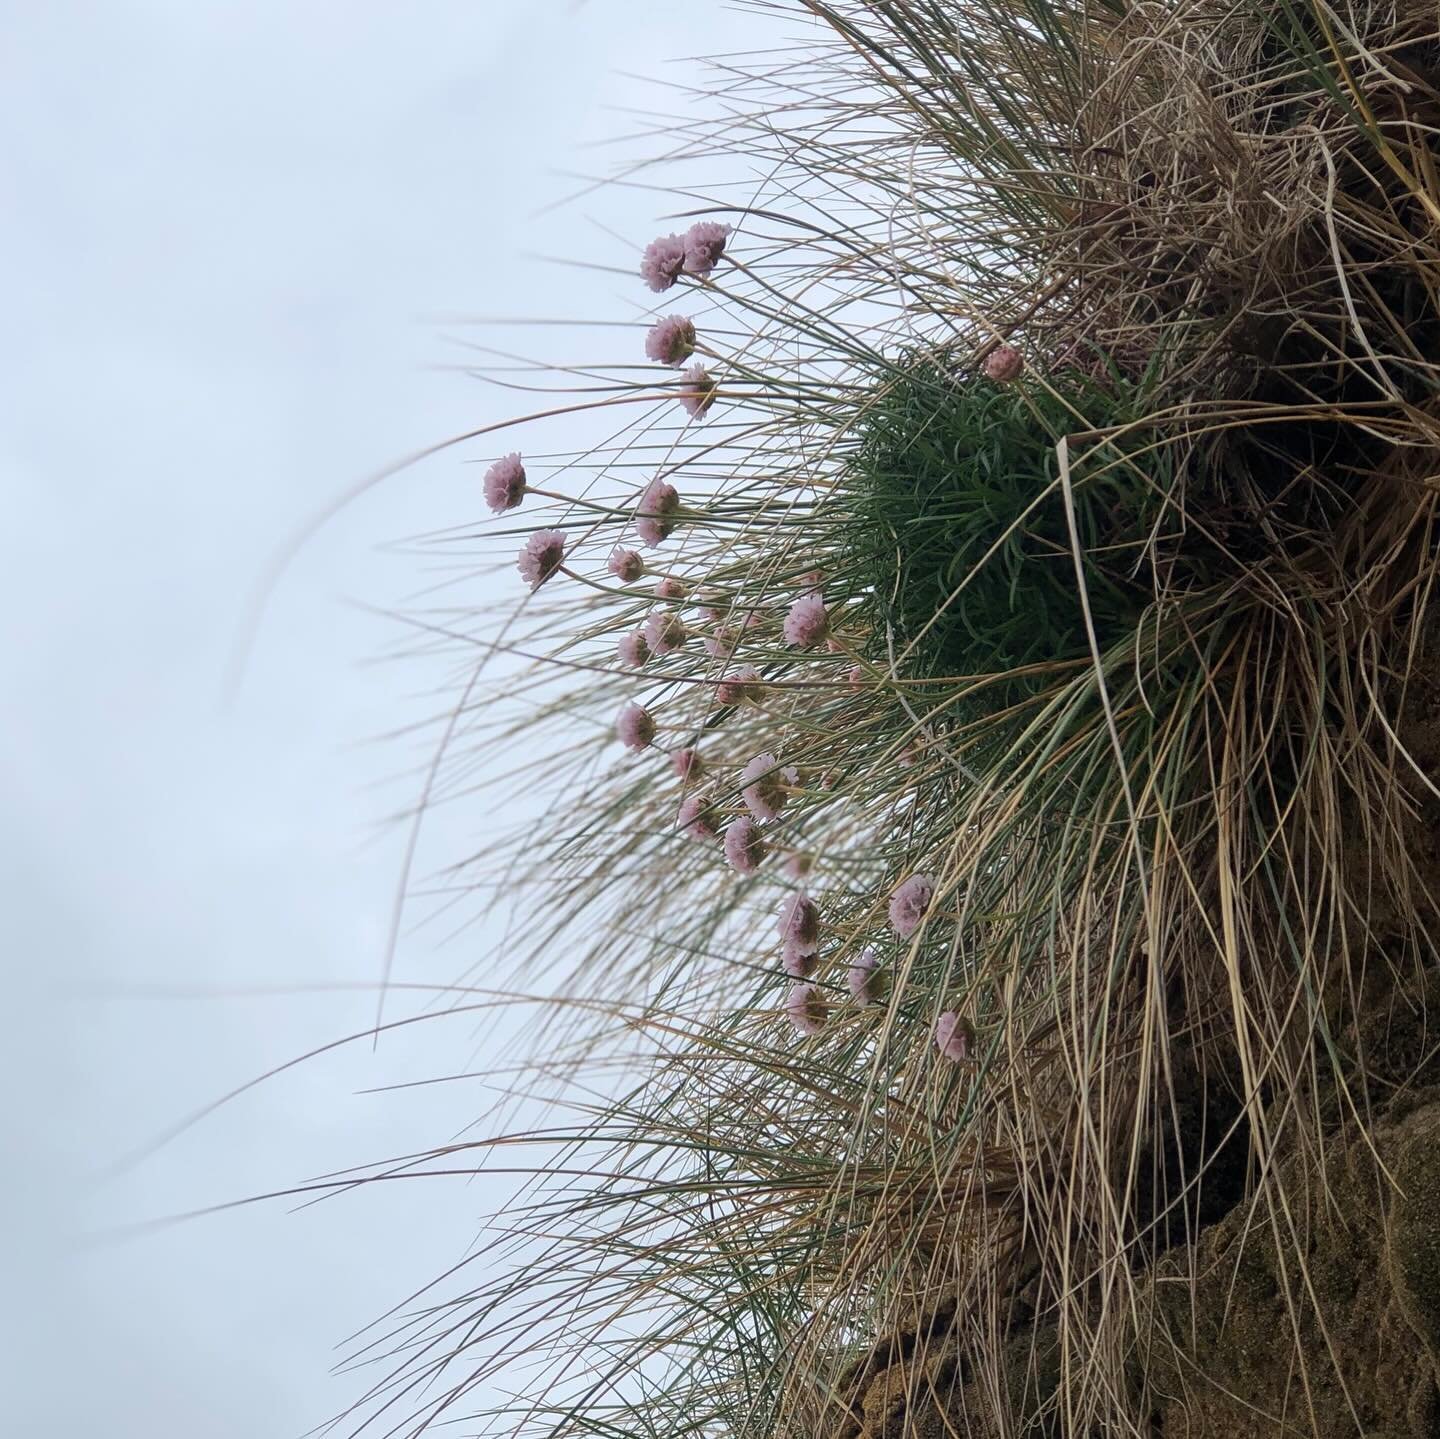 SEA pinks 🌸 have always hailed the arrival of warmer months leaving the long winter behind. I have always loved these hardy candy floss pink flowers that appear in clusters all over the cliffs at this time of year. One of Cornwall&rsquo;s most disti